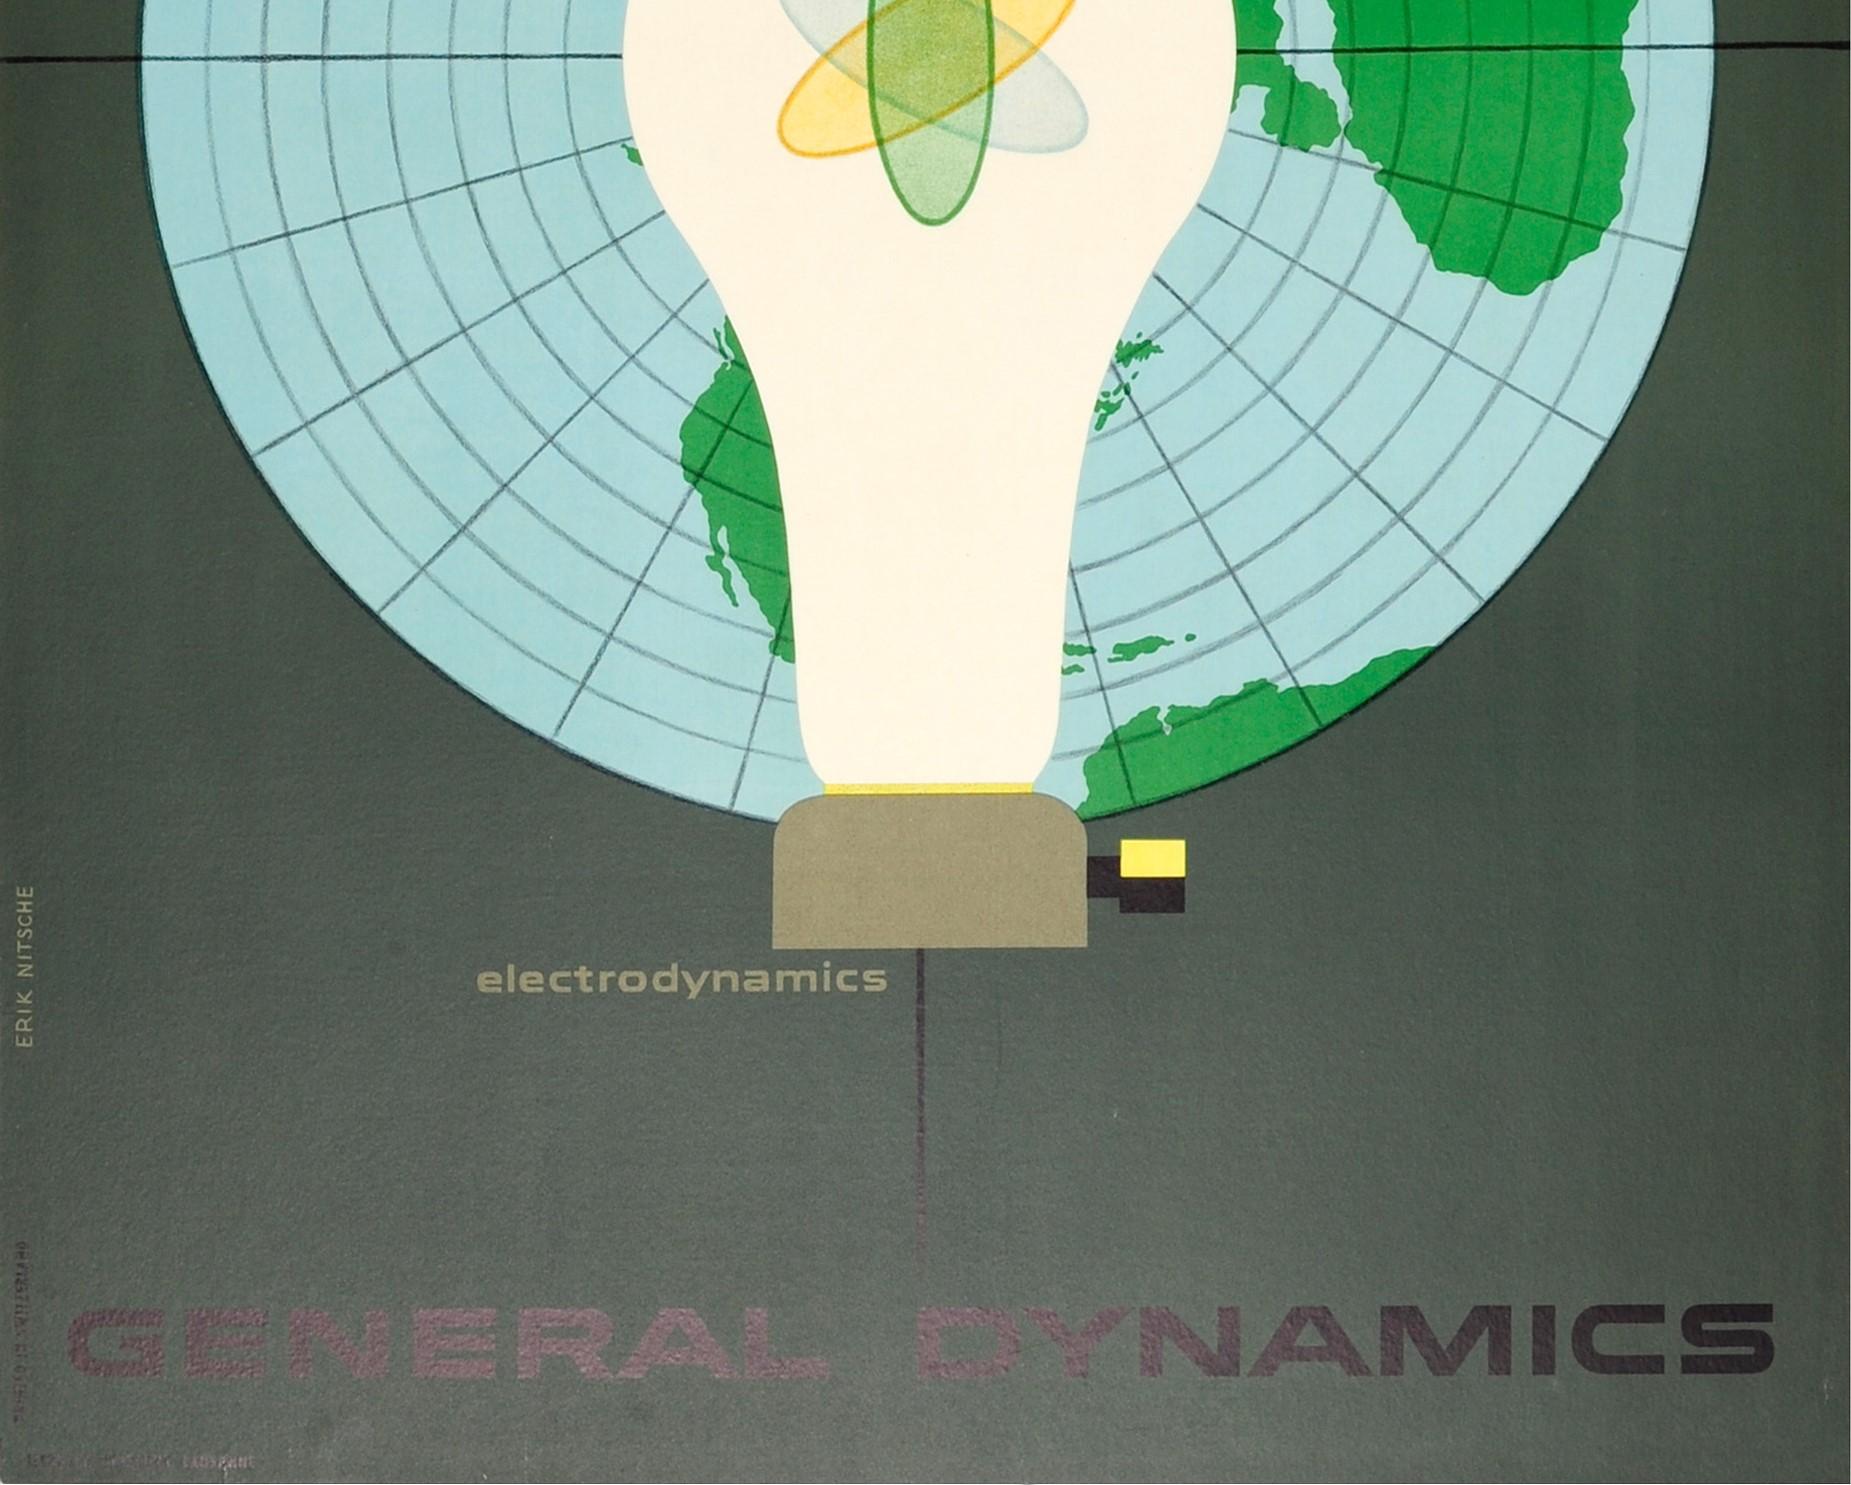 Original Vintage General Dynamics Poster Electrodynamics Atoms for Peace Nitsche im Zustand „Gut“ in London, GB